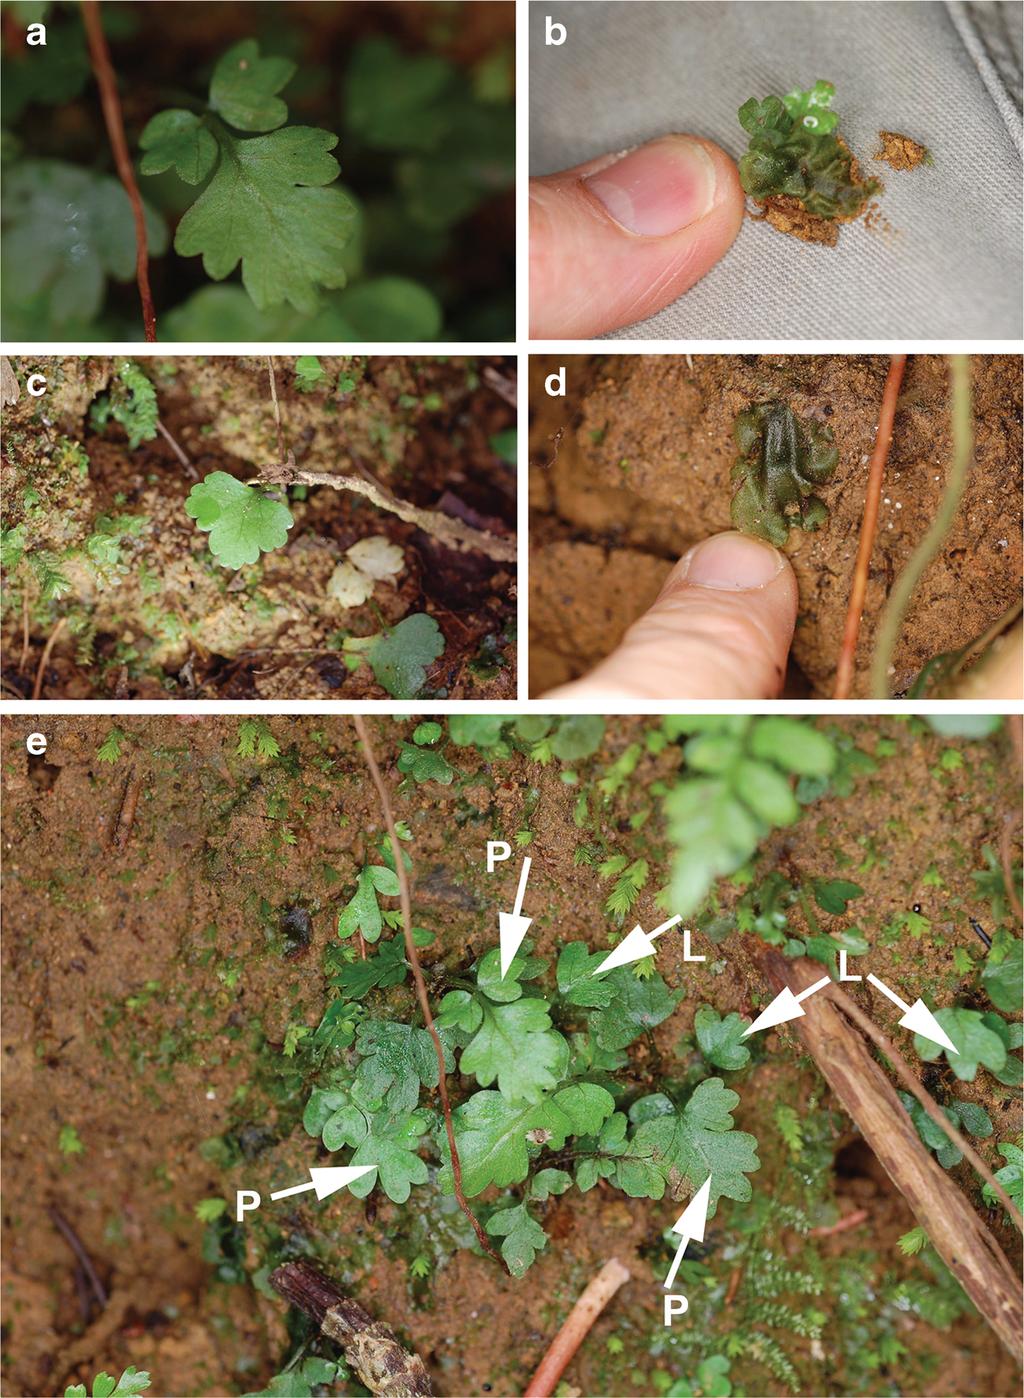 [VOL BRITTONIA FIG. 1. Gametophytes and young sporophytes of Pteris livida and P. podophylla at type locality of P. caridadiae. A. Young sporophyte of P. podophylla. B. Gametophyte of P. livida. C.